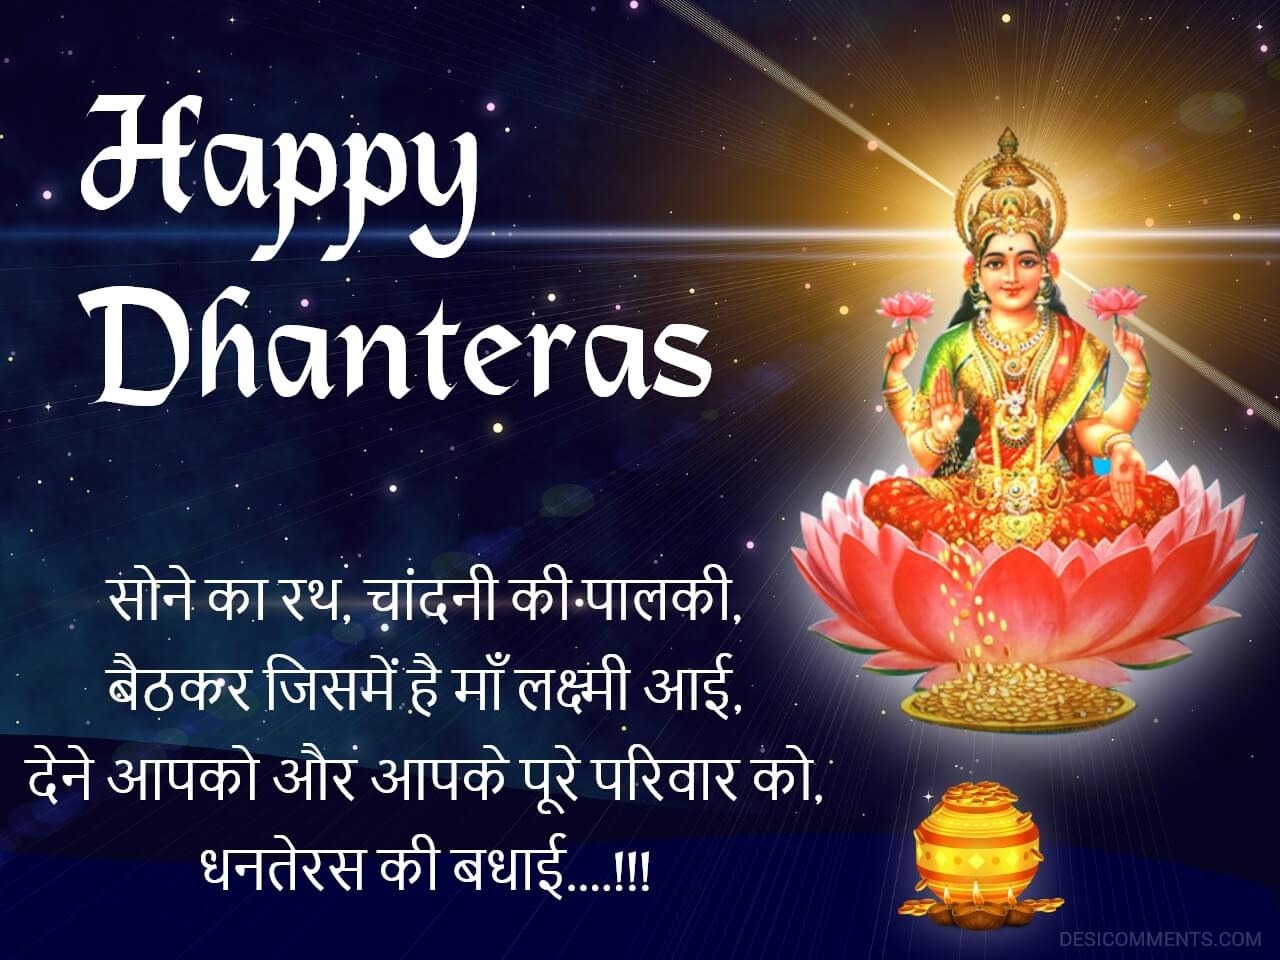 120+ Dhanteras Images, Pictures, Photos - Page 2